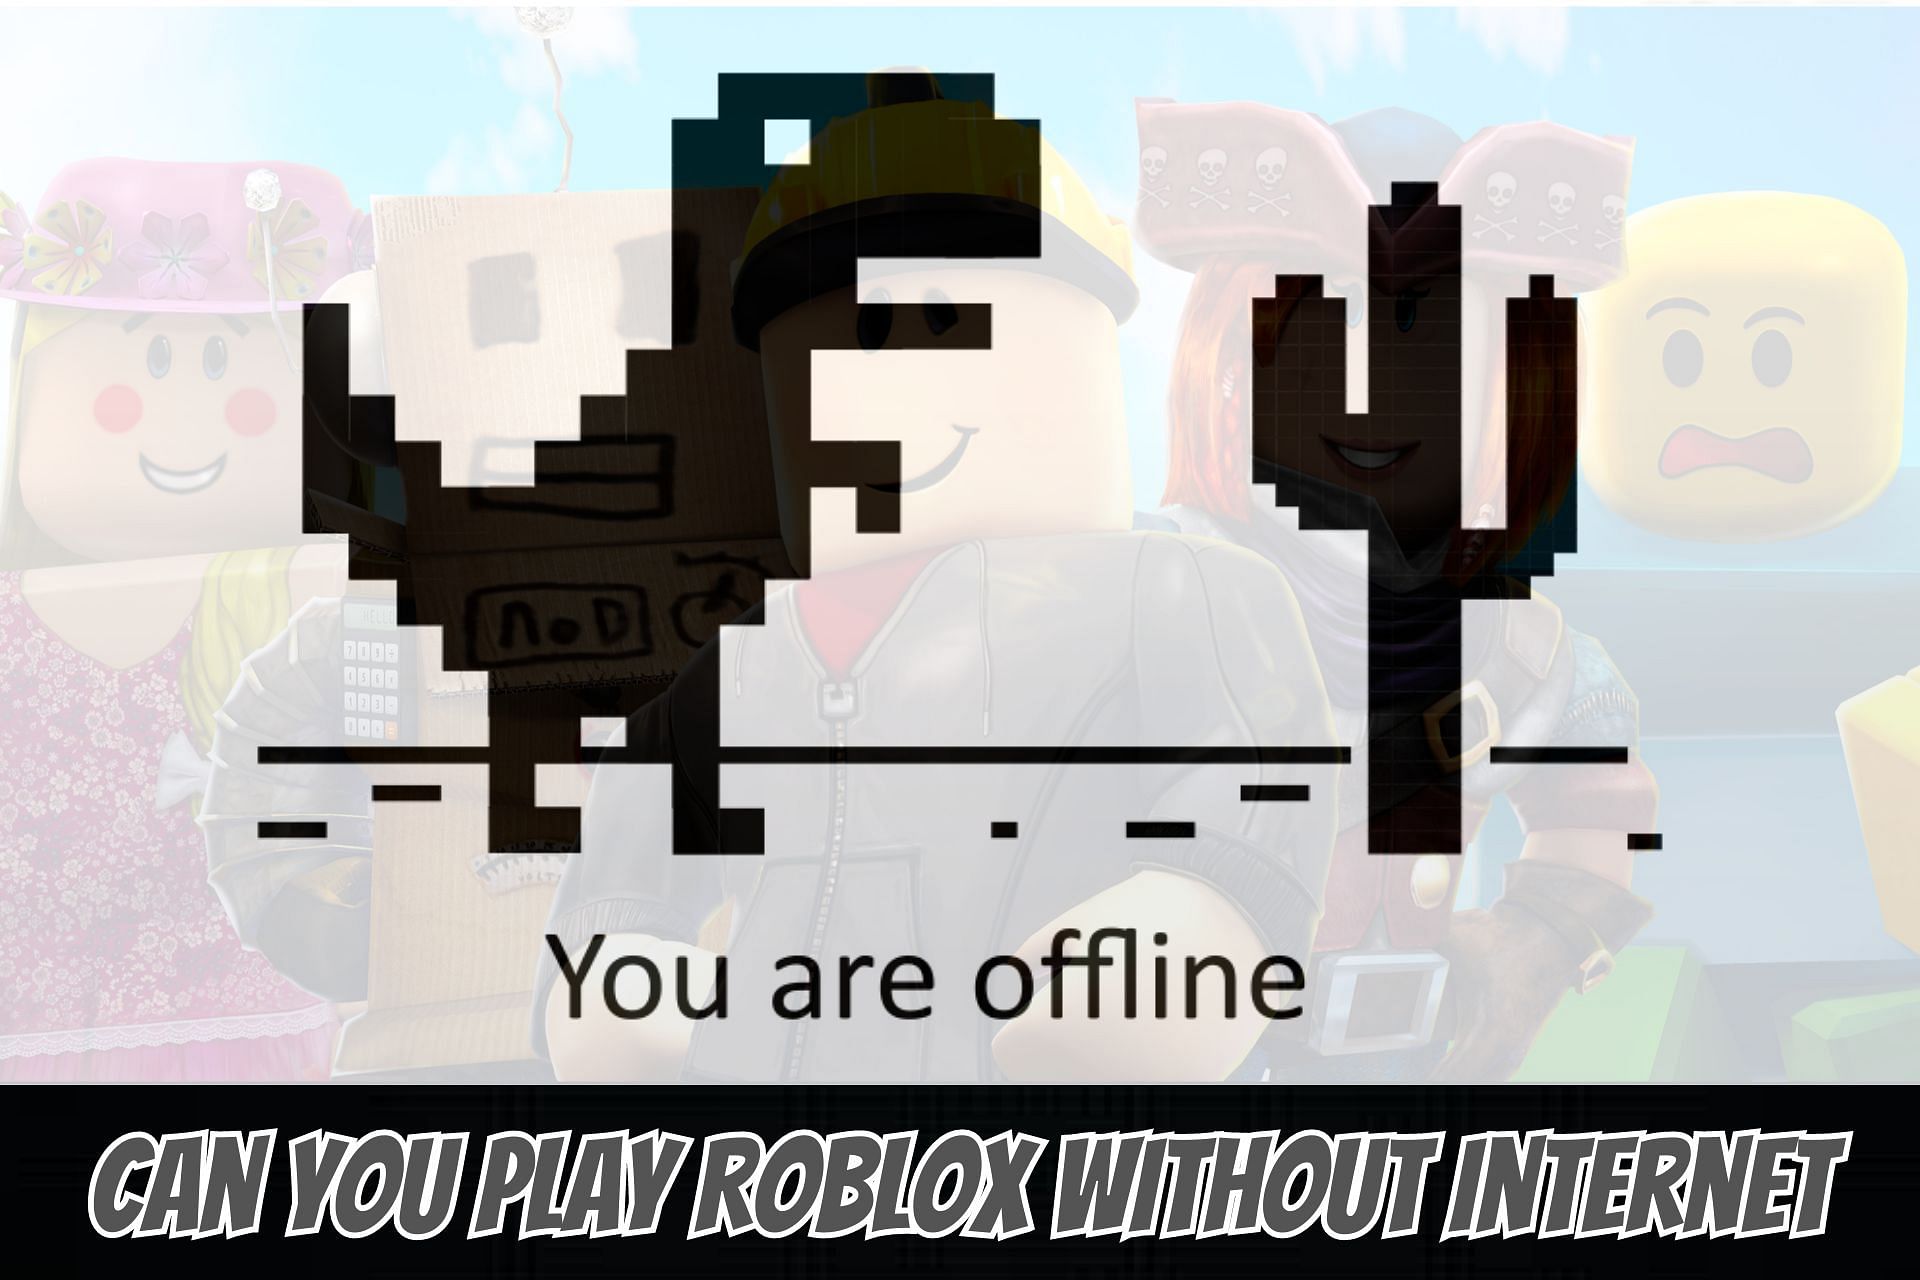 How To Play Roblox Without Download